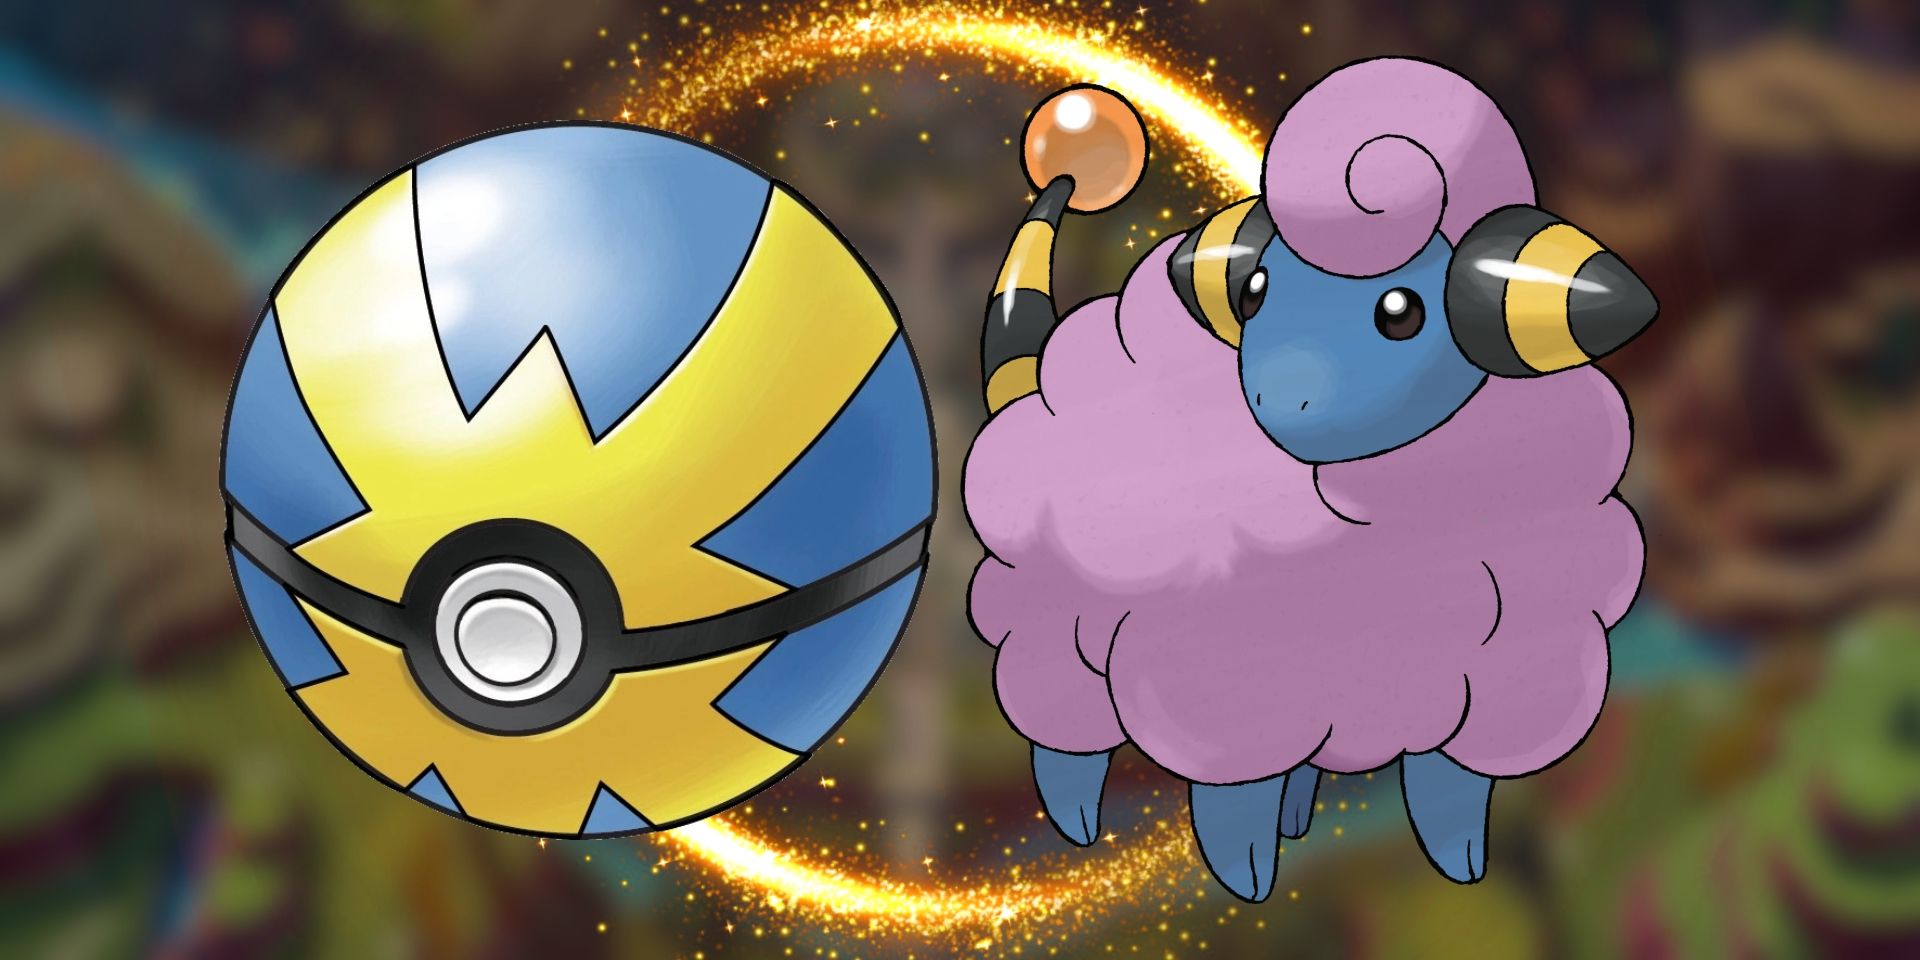 Pokemon's Quick Ball to the left and a Shiny Mareep to the right. Behind them is a ring of light and in the background is a blurred-out image of the map of Paldea.